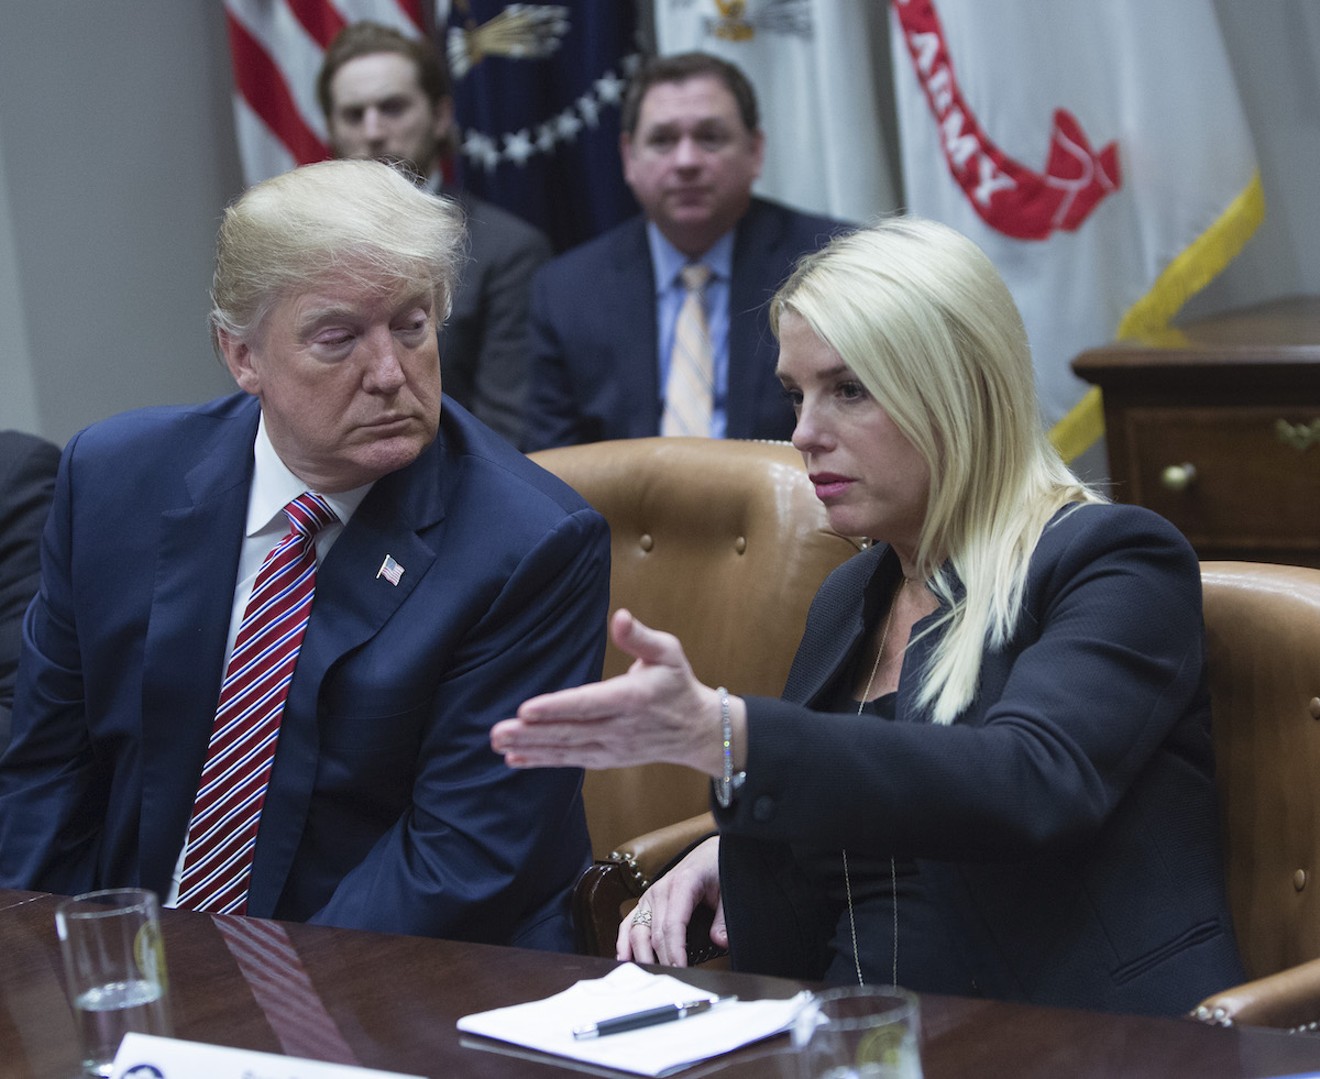 Today's announcement that Pam Bondi will join the Trump White House has ethics watchdogs furious.